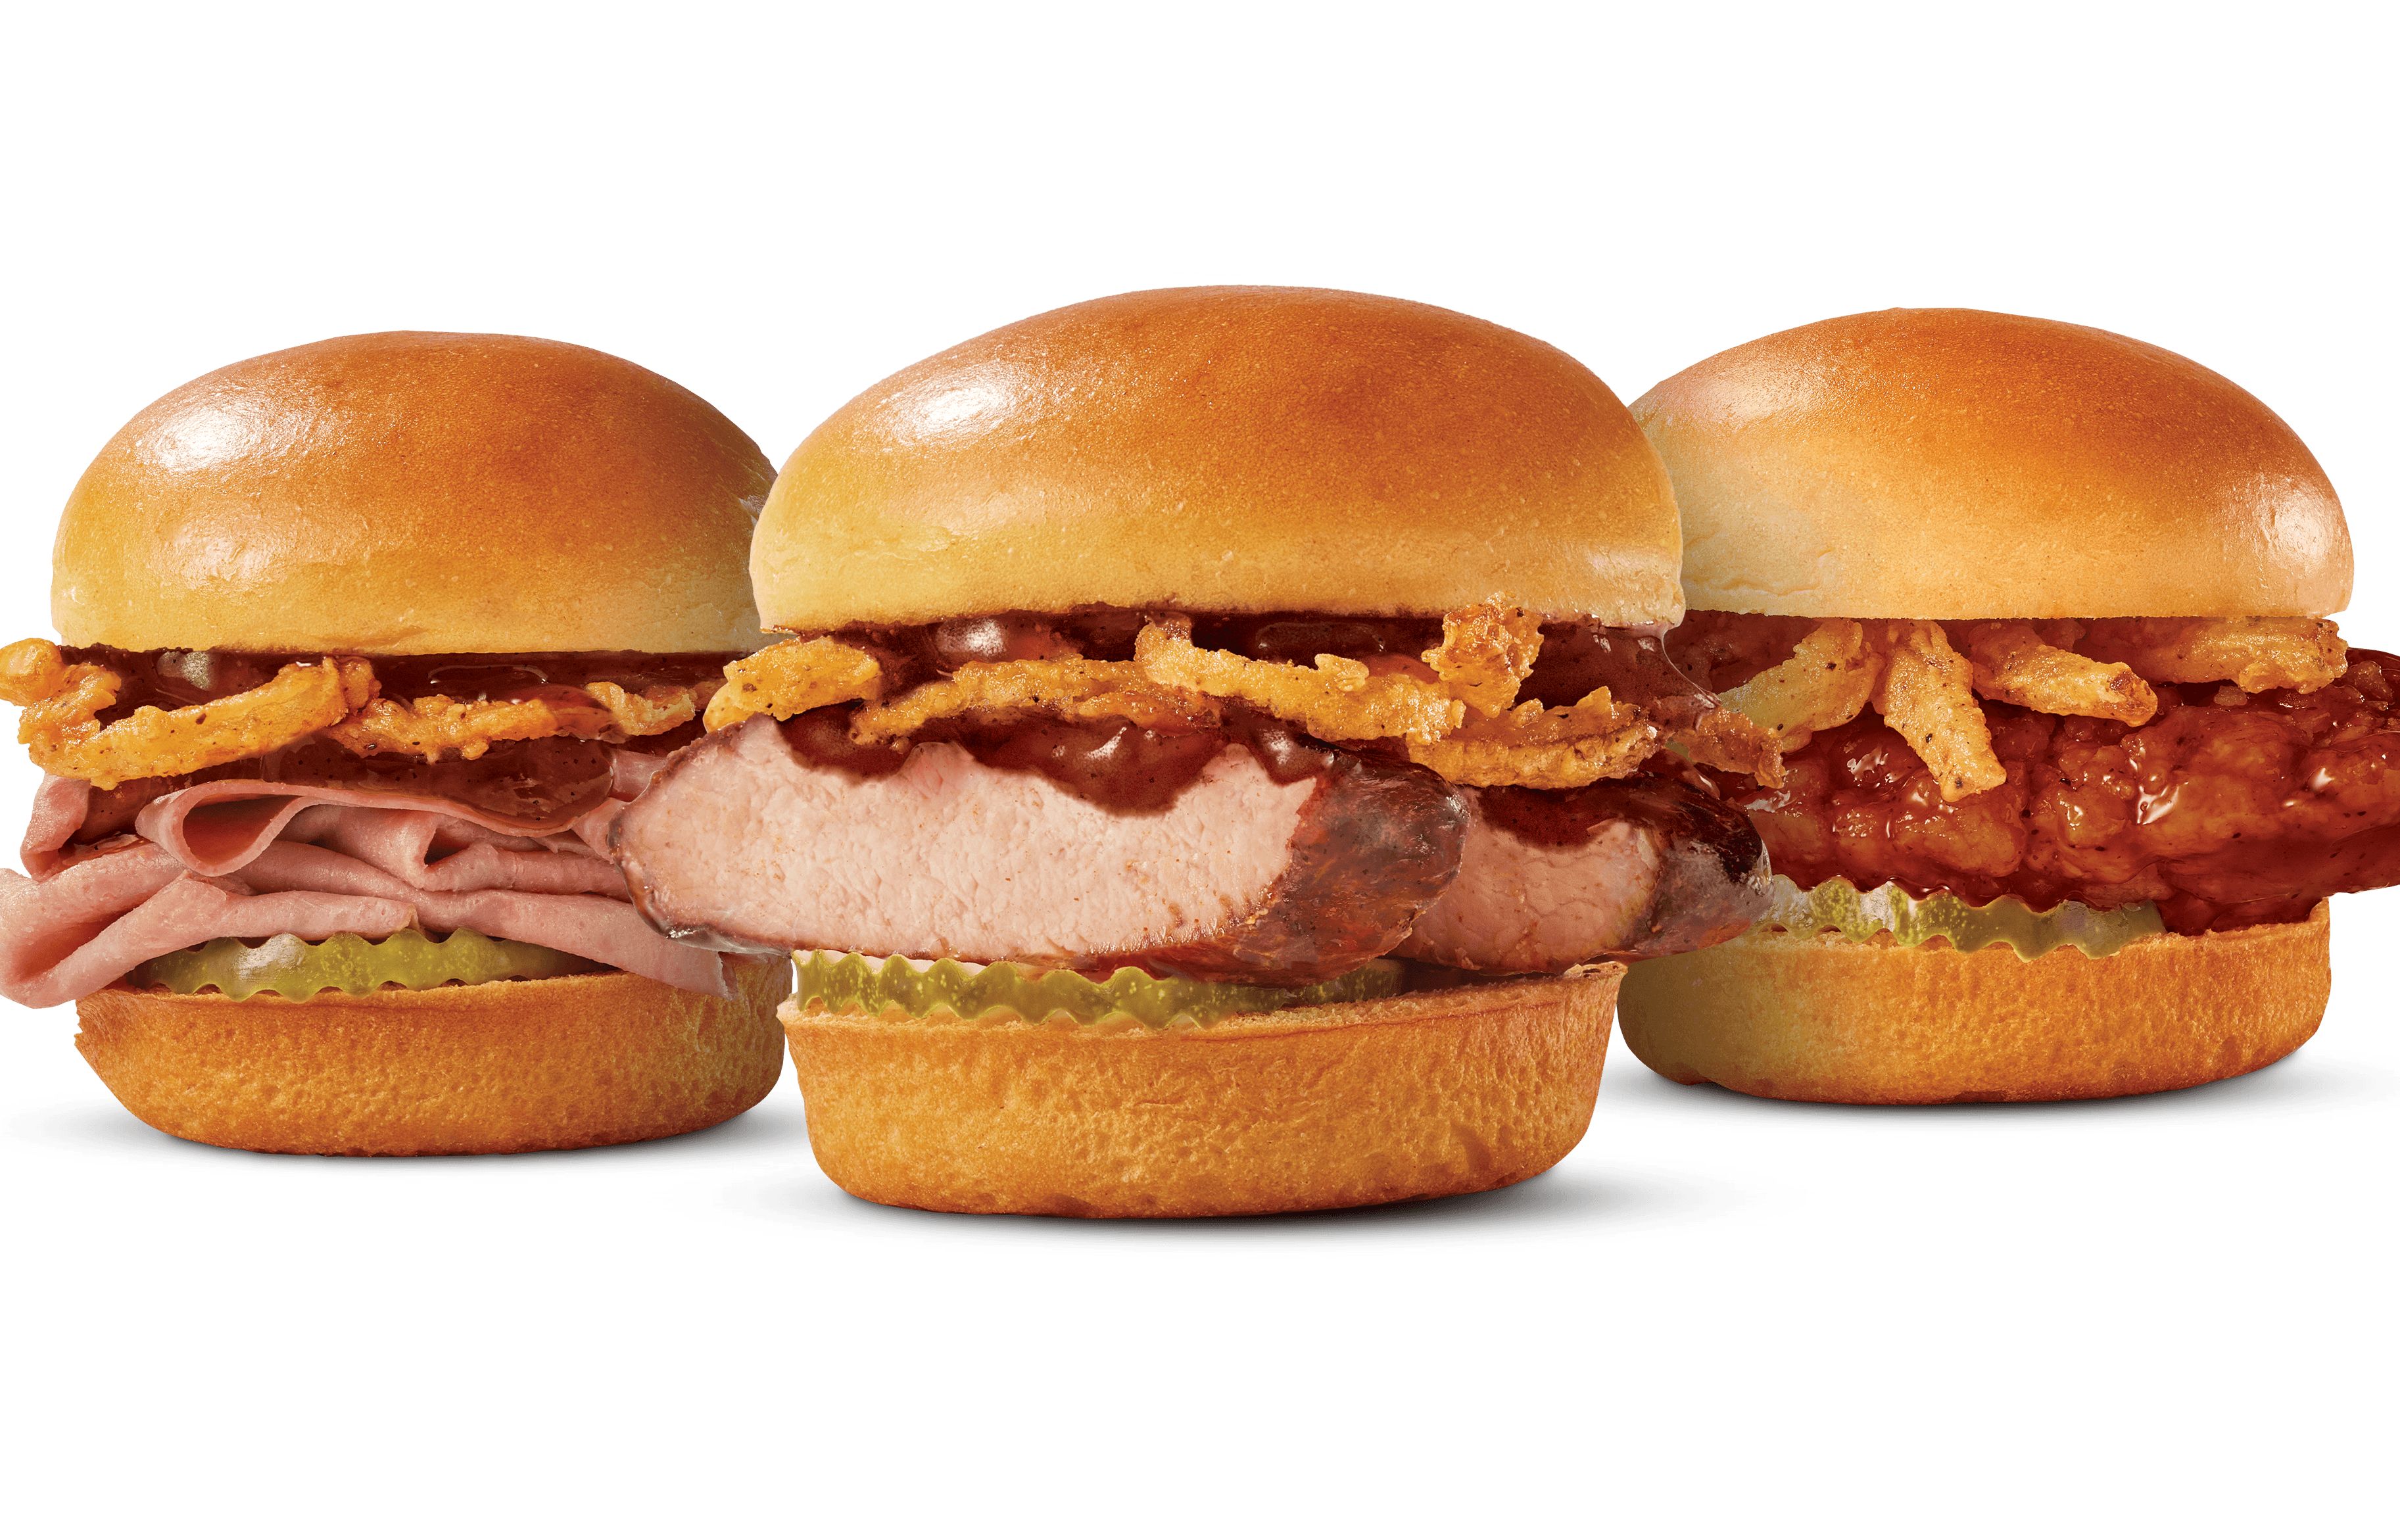 Save with a 2 for $4 Deal on Arby’s Bourbon BBQ Sliders